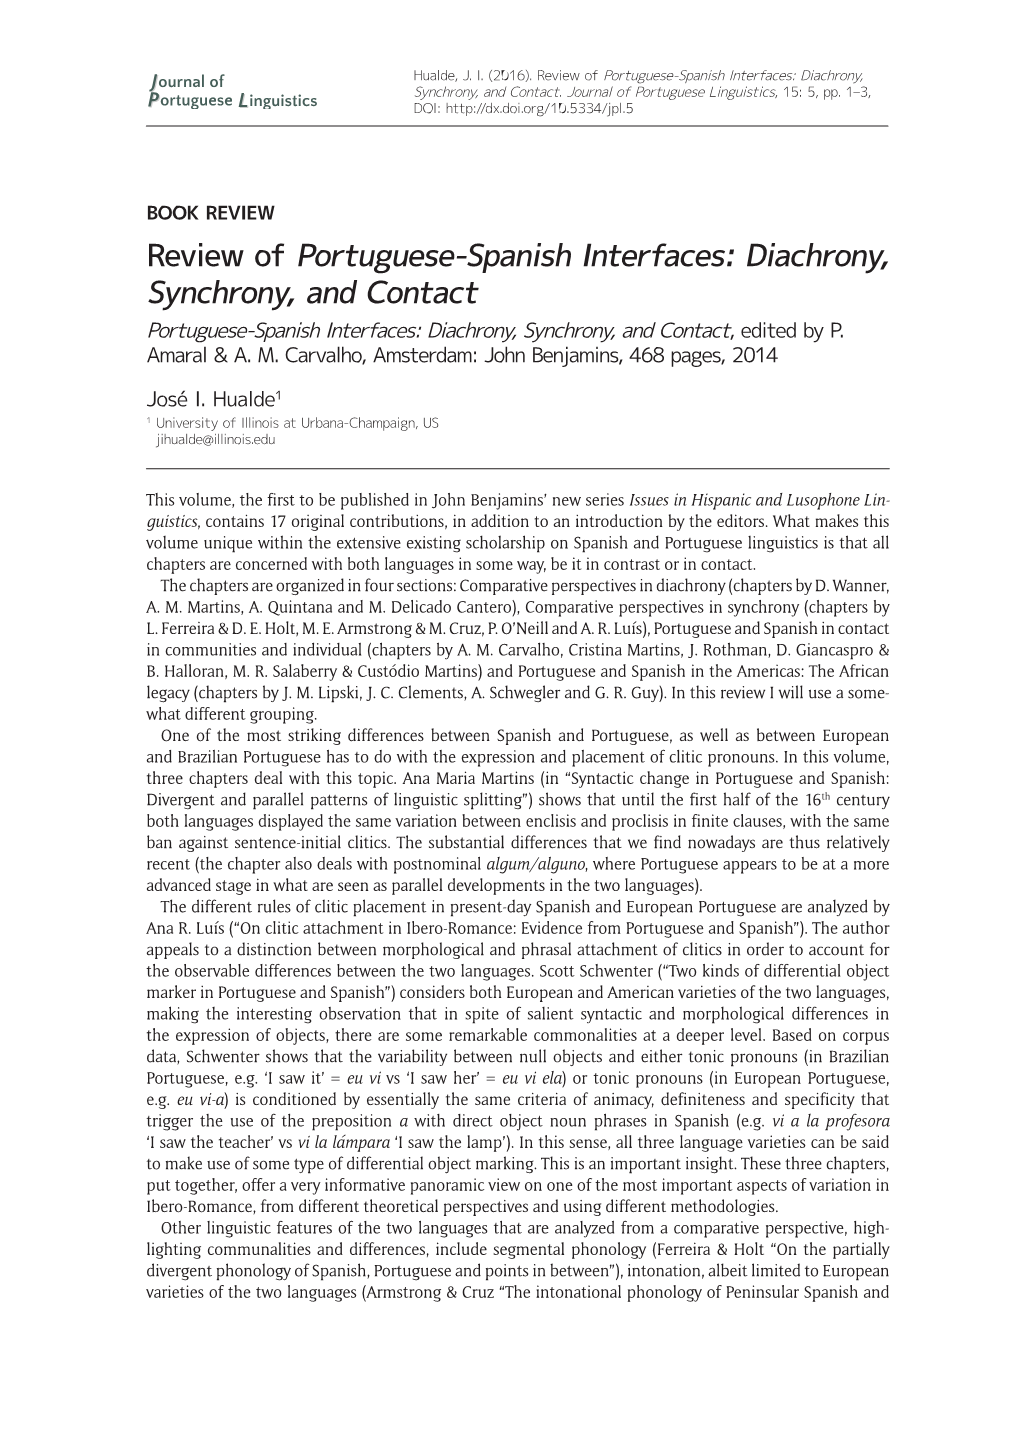 Review of Portuguese-Spanish Interfaces: Diachrony, Synchrony, and Contact Portuguese-Spanish Interfaces: Diachrony, Synchrony, and Contact, Edited by P